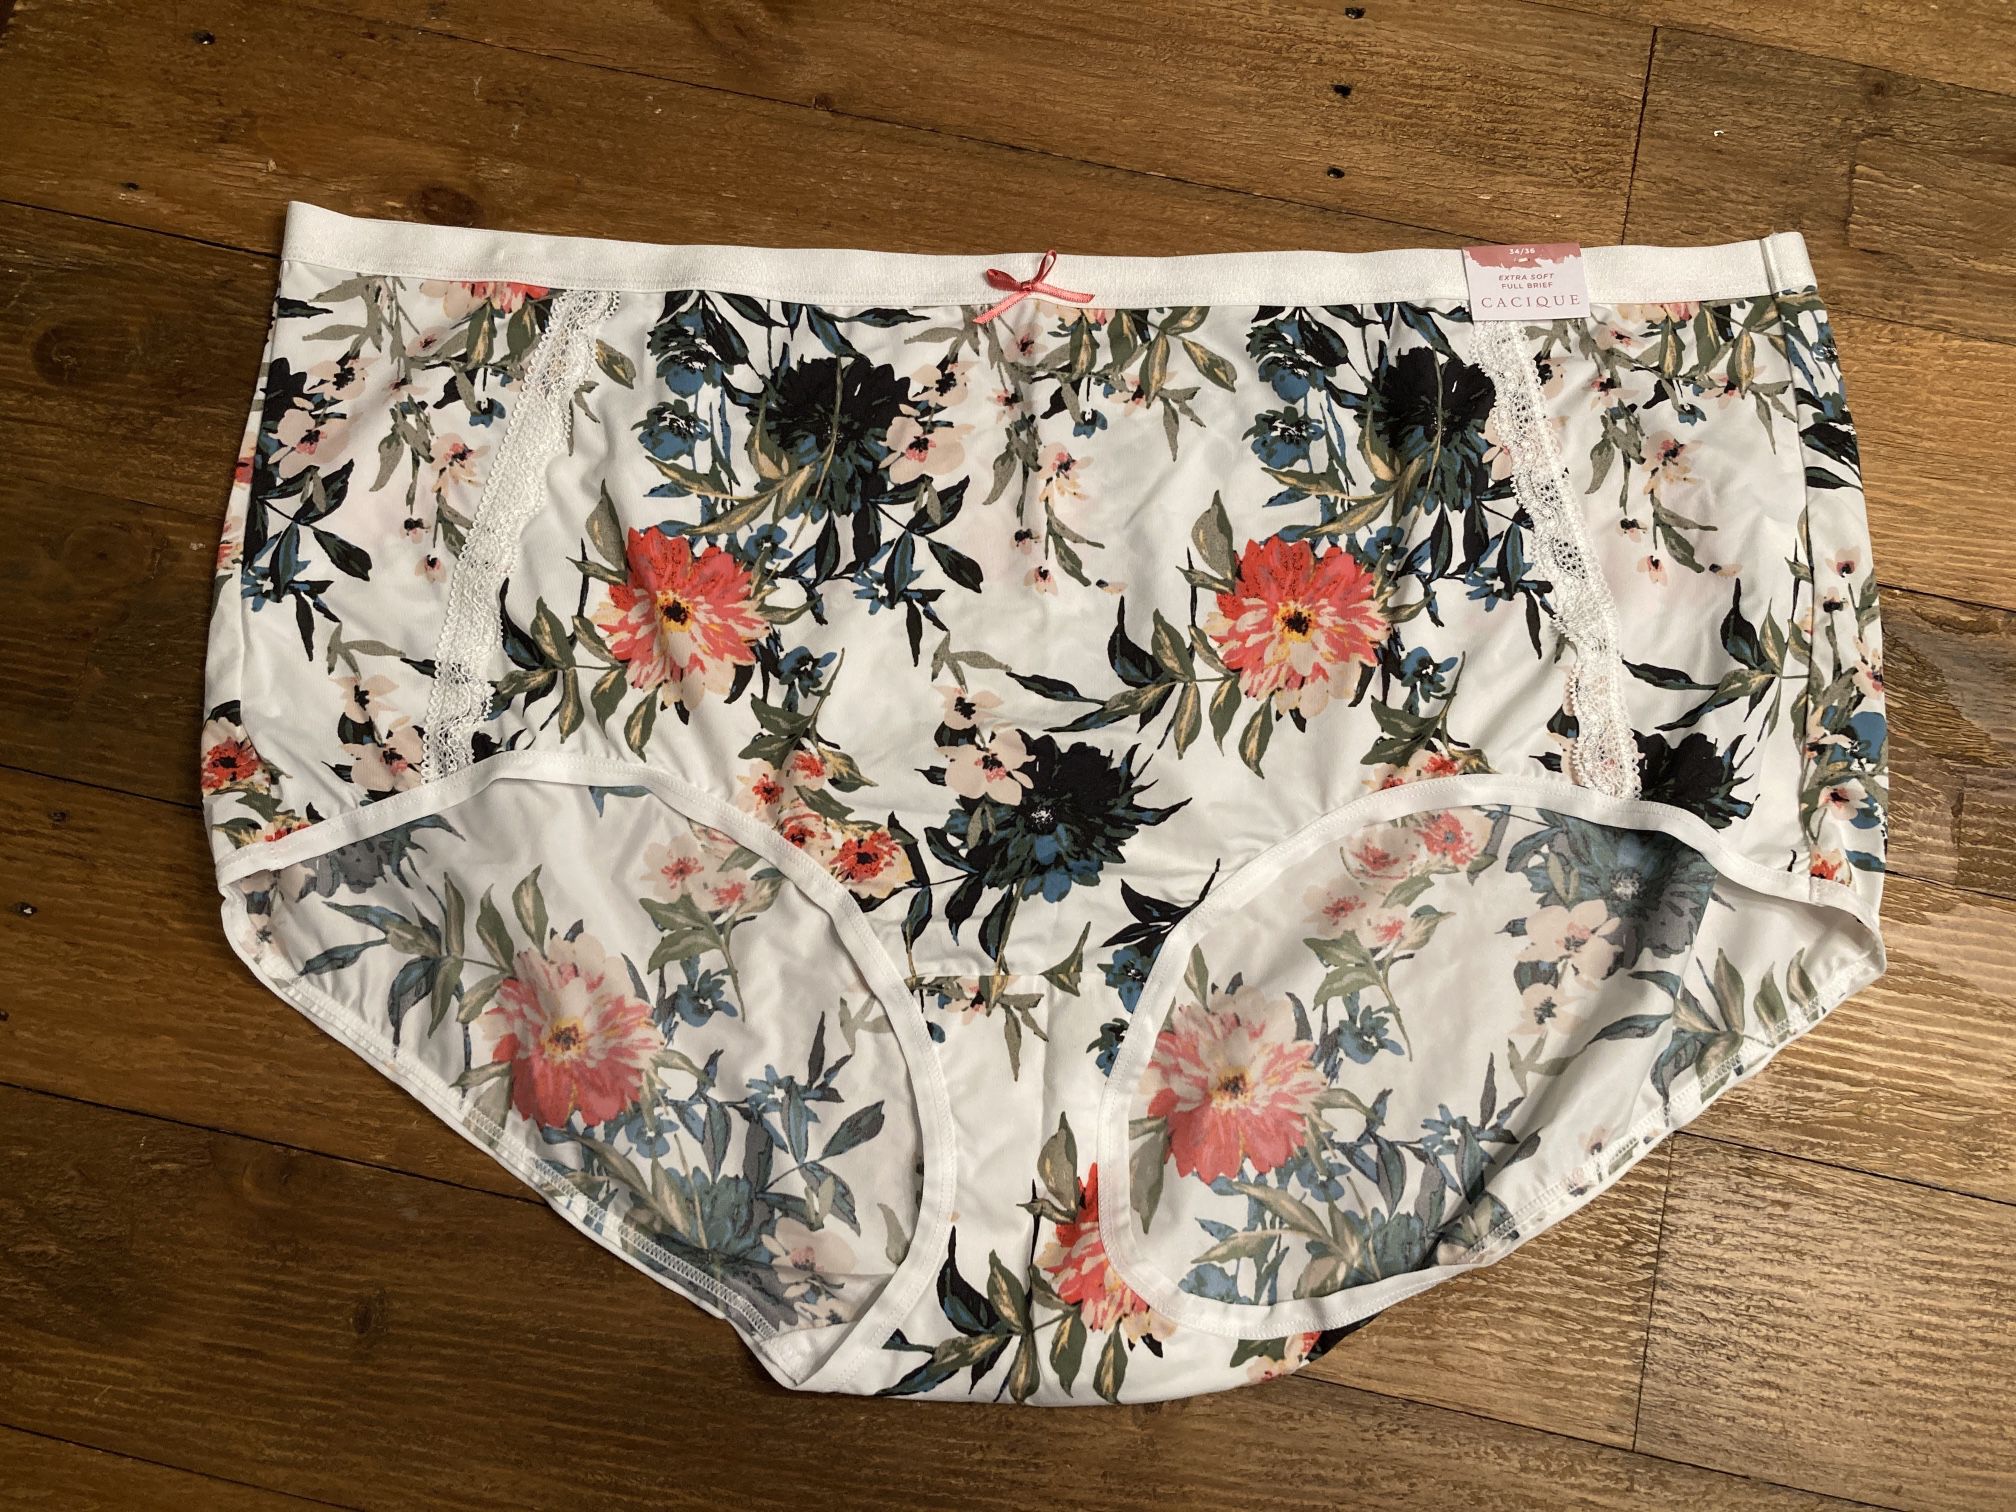 Cacique 34/36 NWT extra soft full brief floral white panties underwear